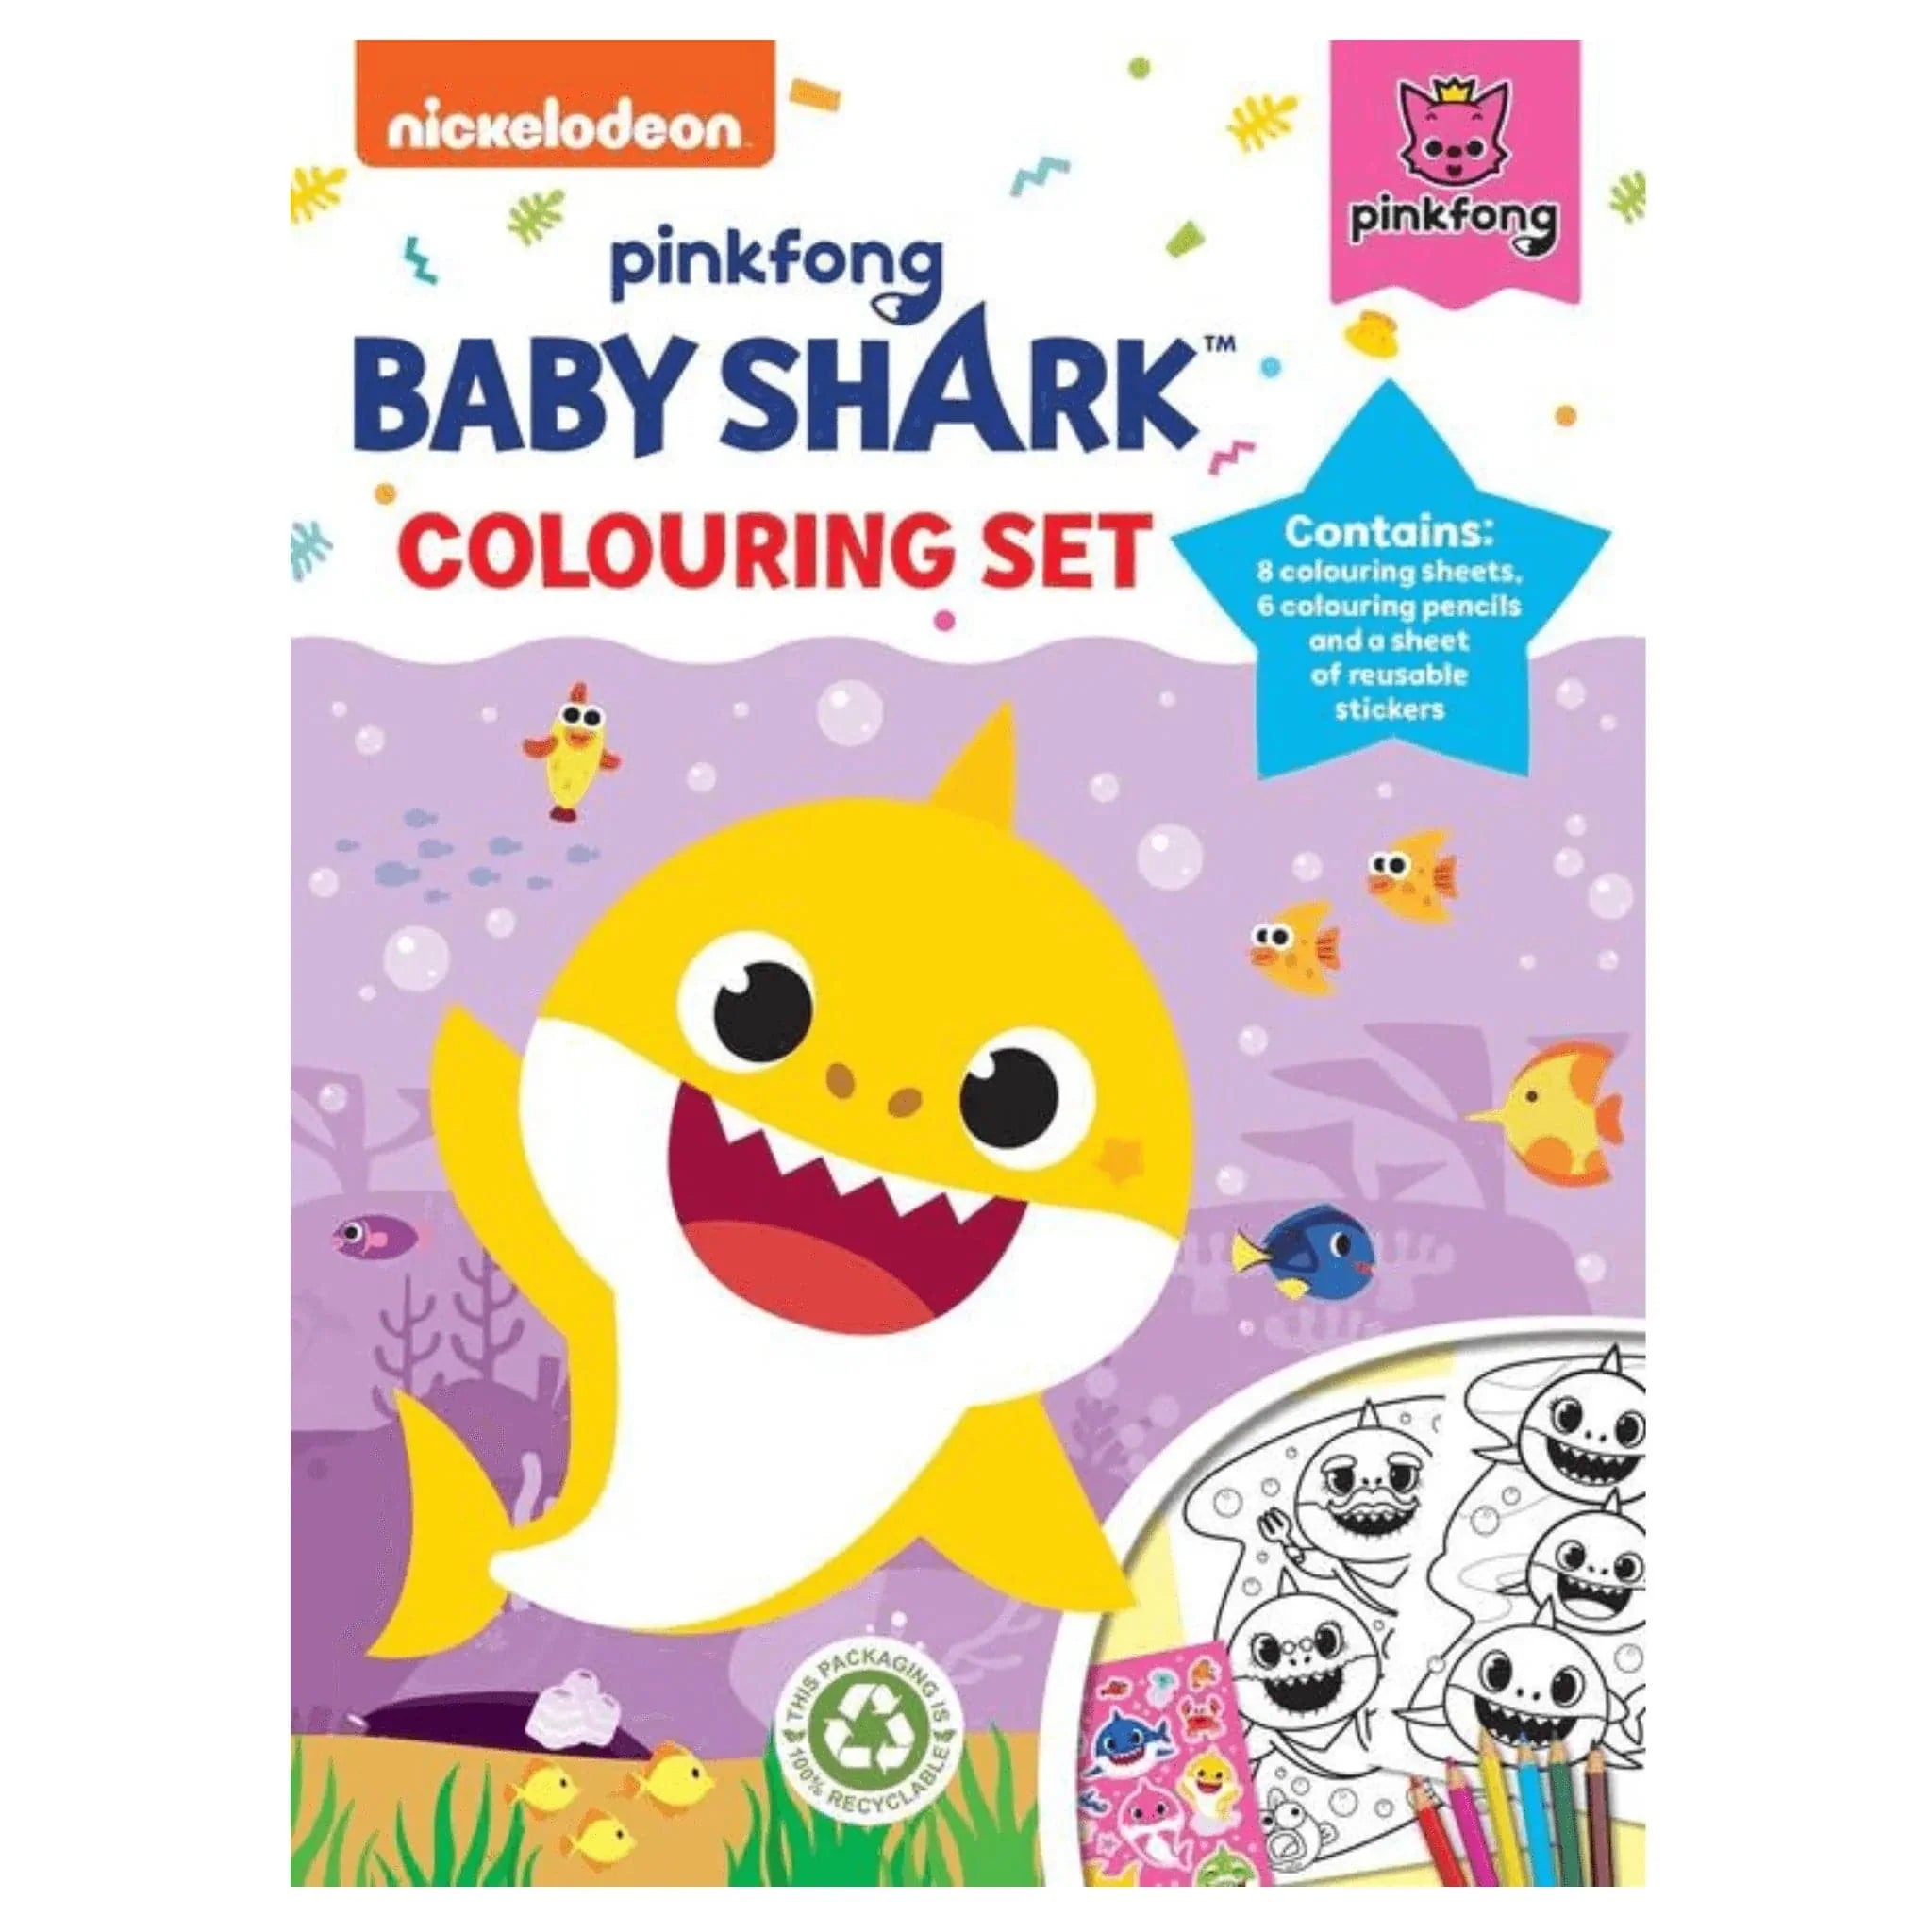 Baby Shark Colouring Set - Kids Party Craft